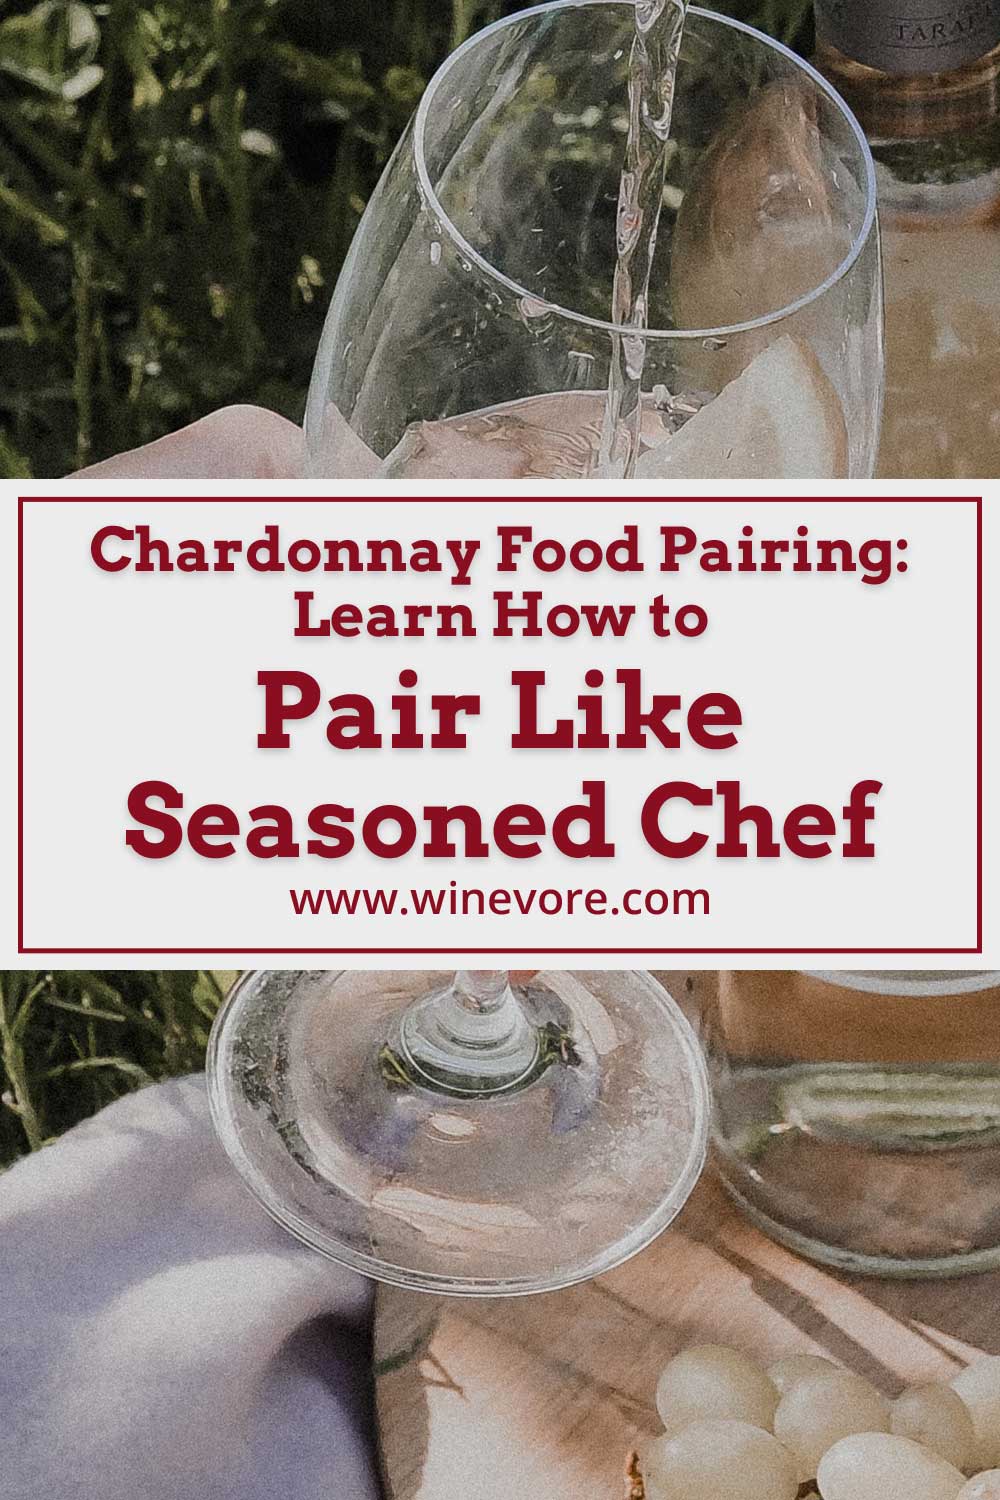 Pouring wine in a glass in outdoor - Chardonnay Food Pairing.